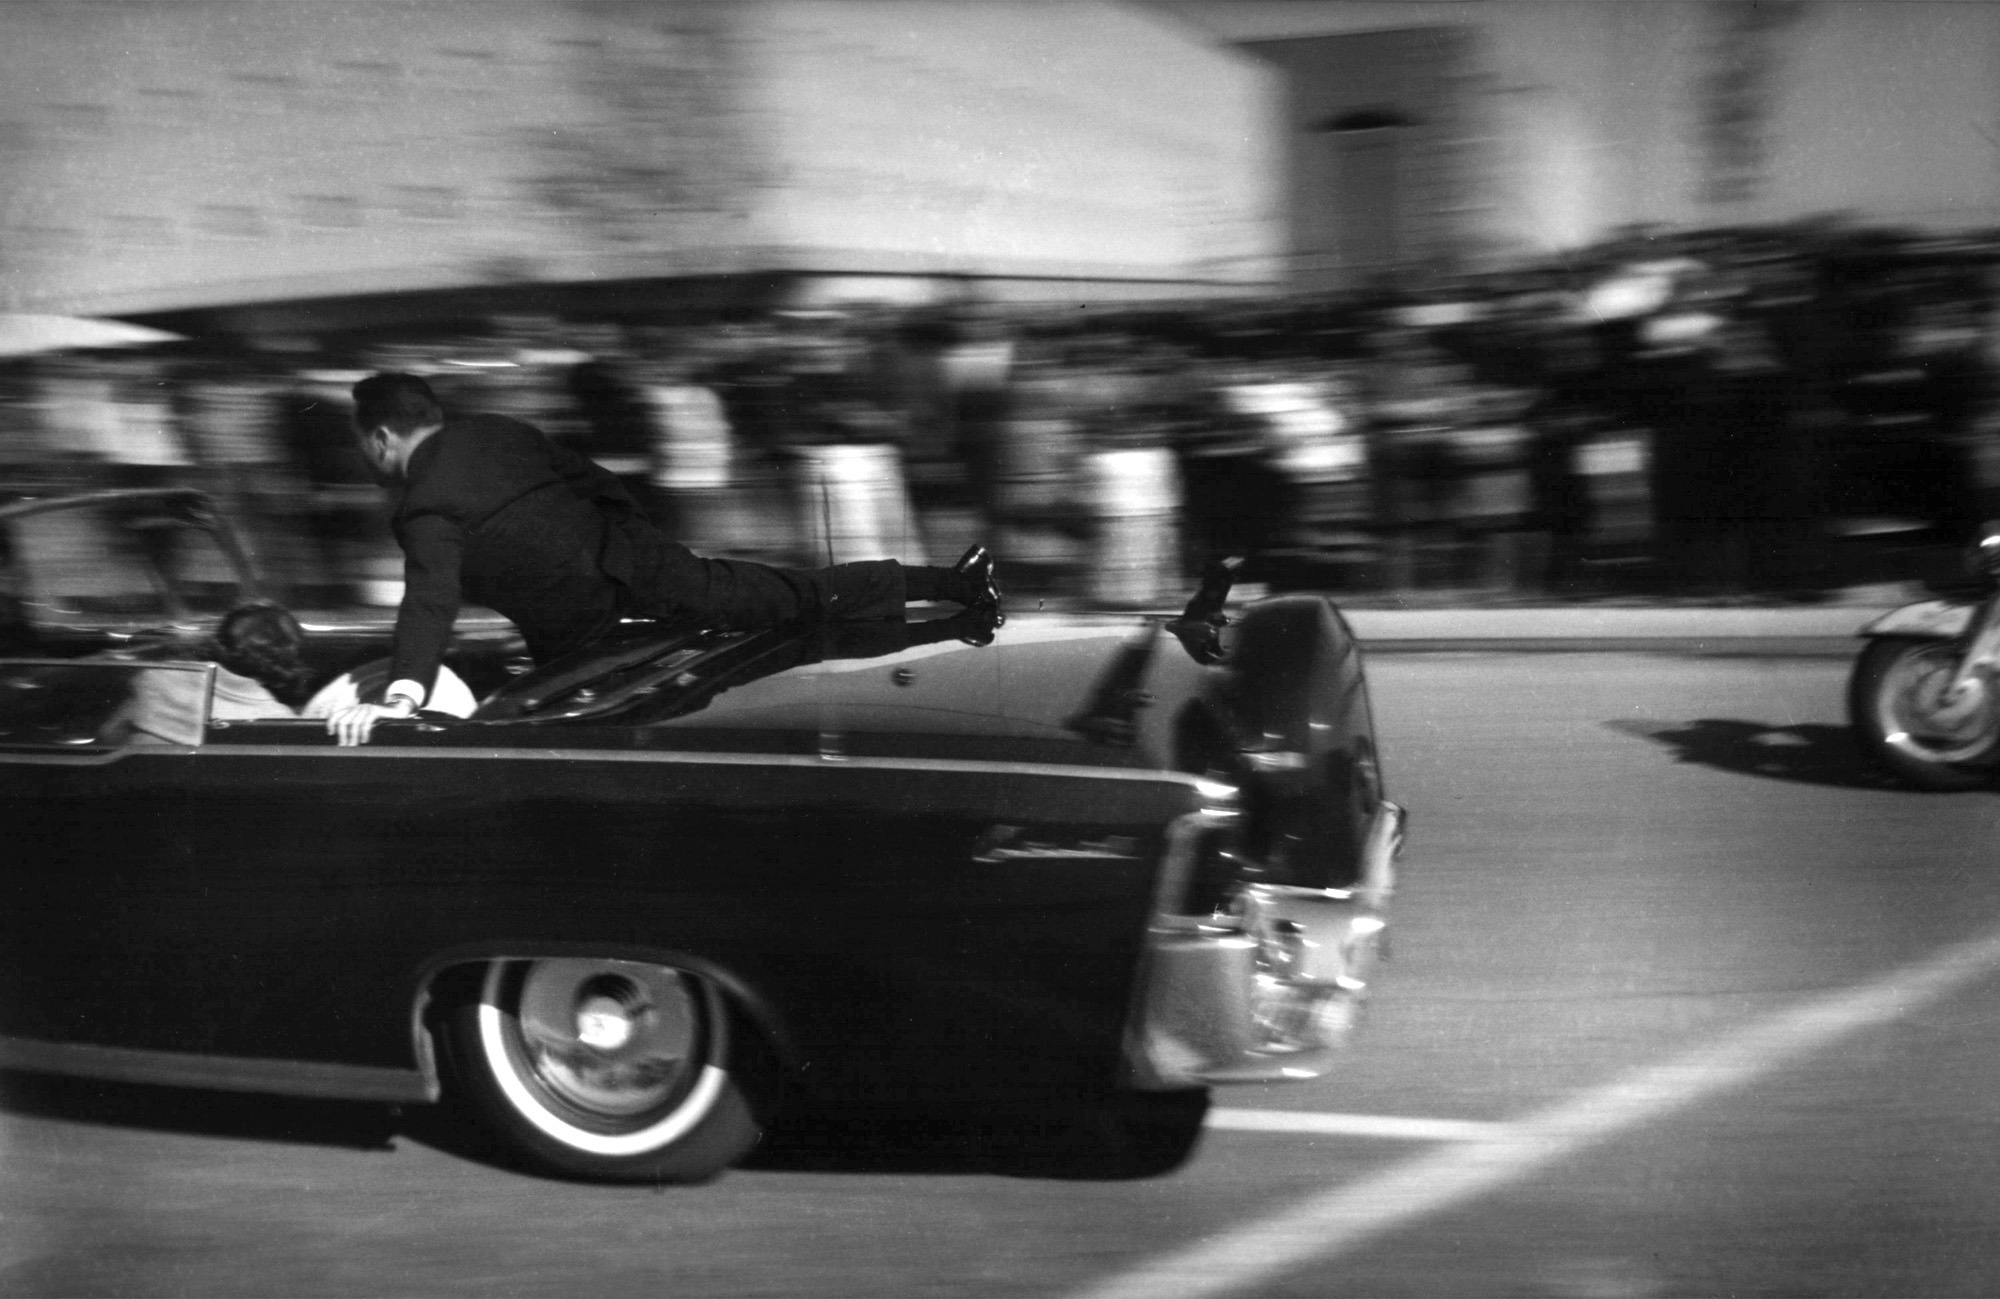 Secret Service Agent Clint Hill uses his body to shield President and Mrs. Kennedy from assassin's bullets on 11/22/63 as car reaches speeds of 80 mph.